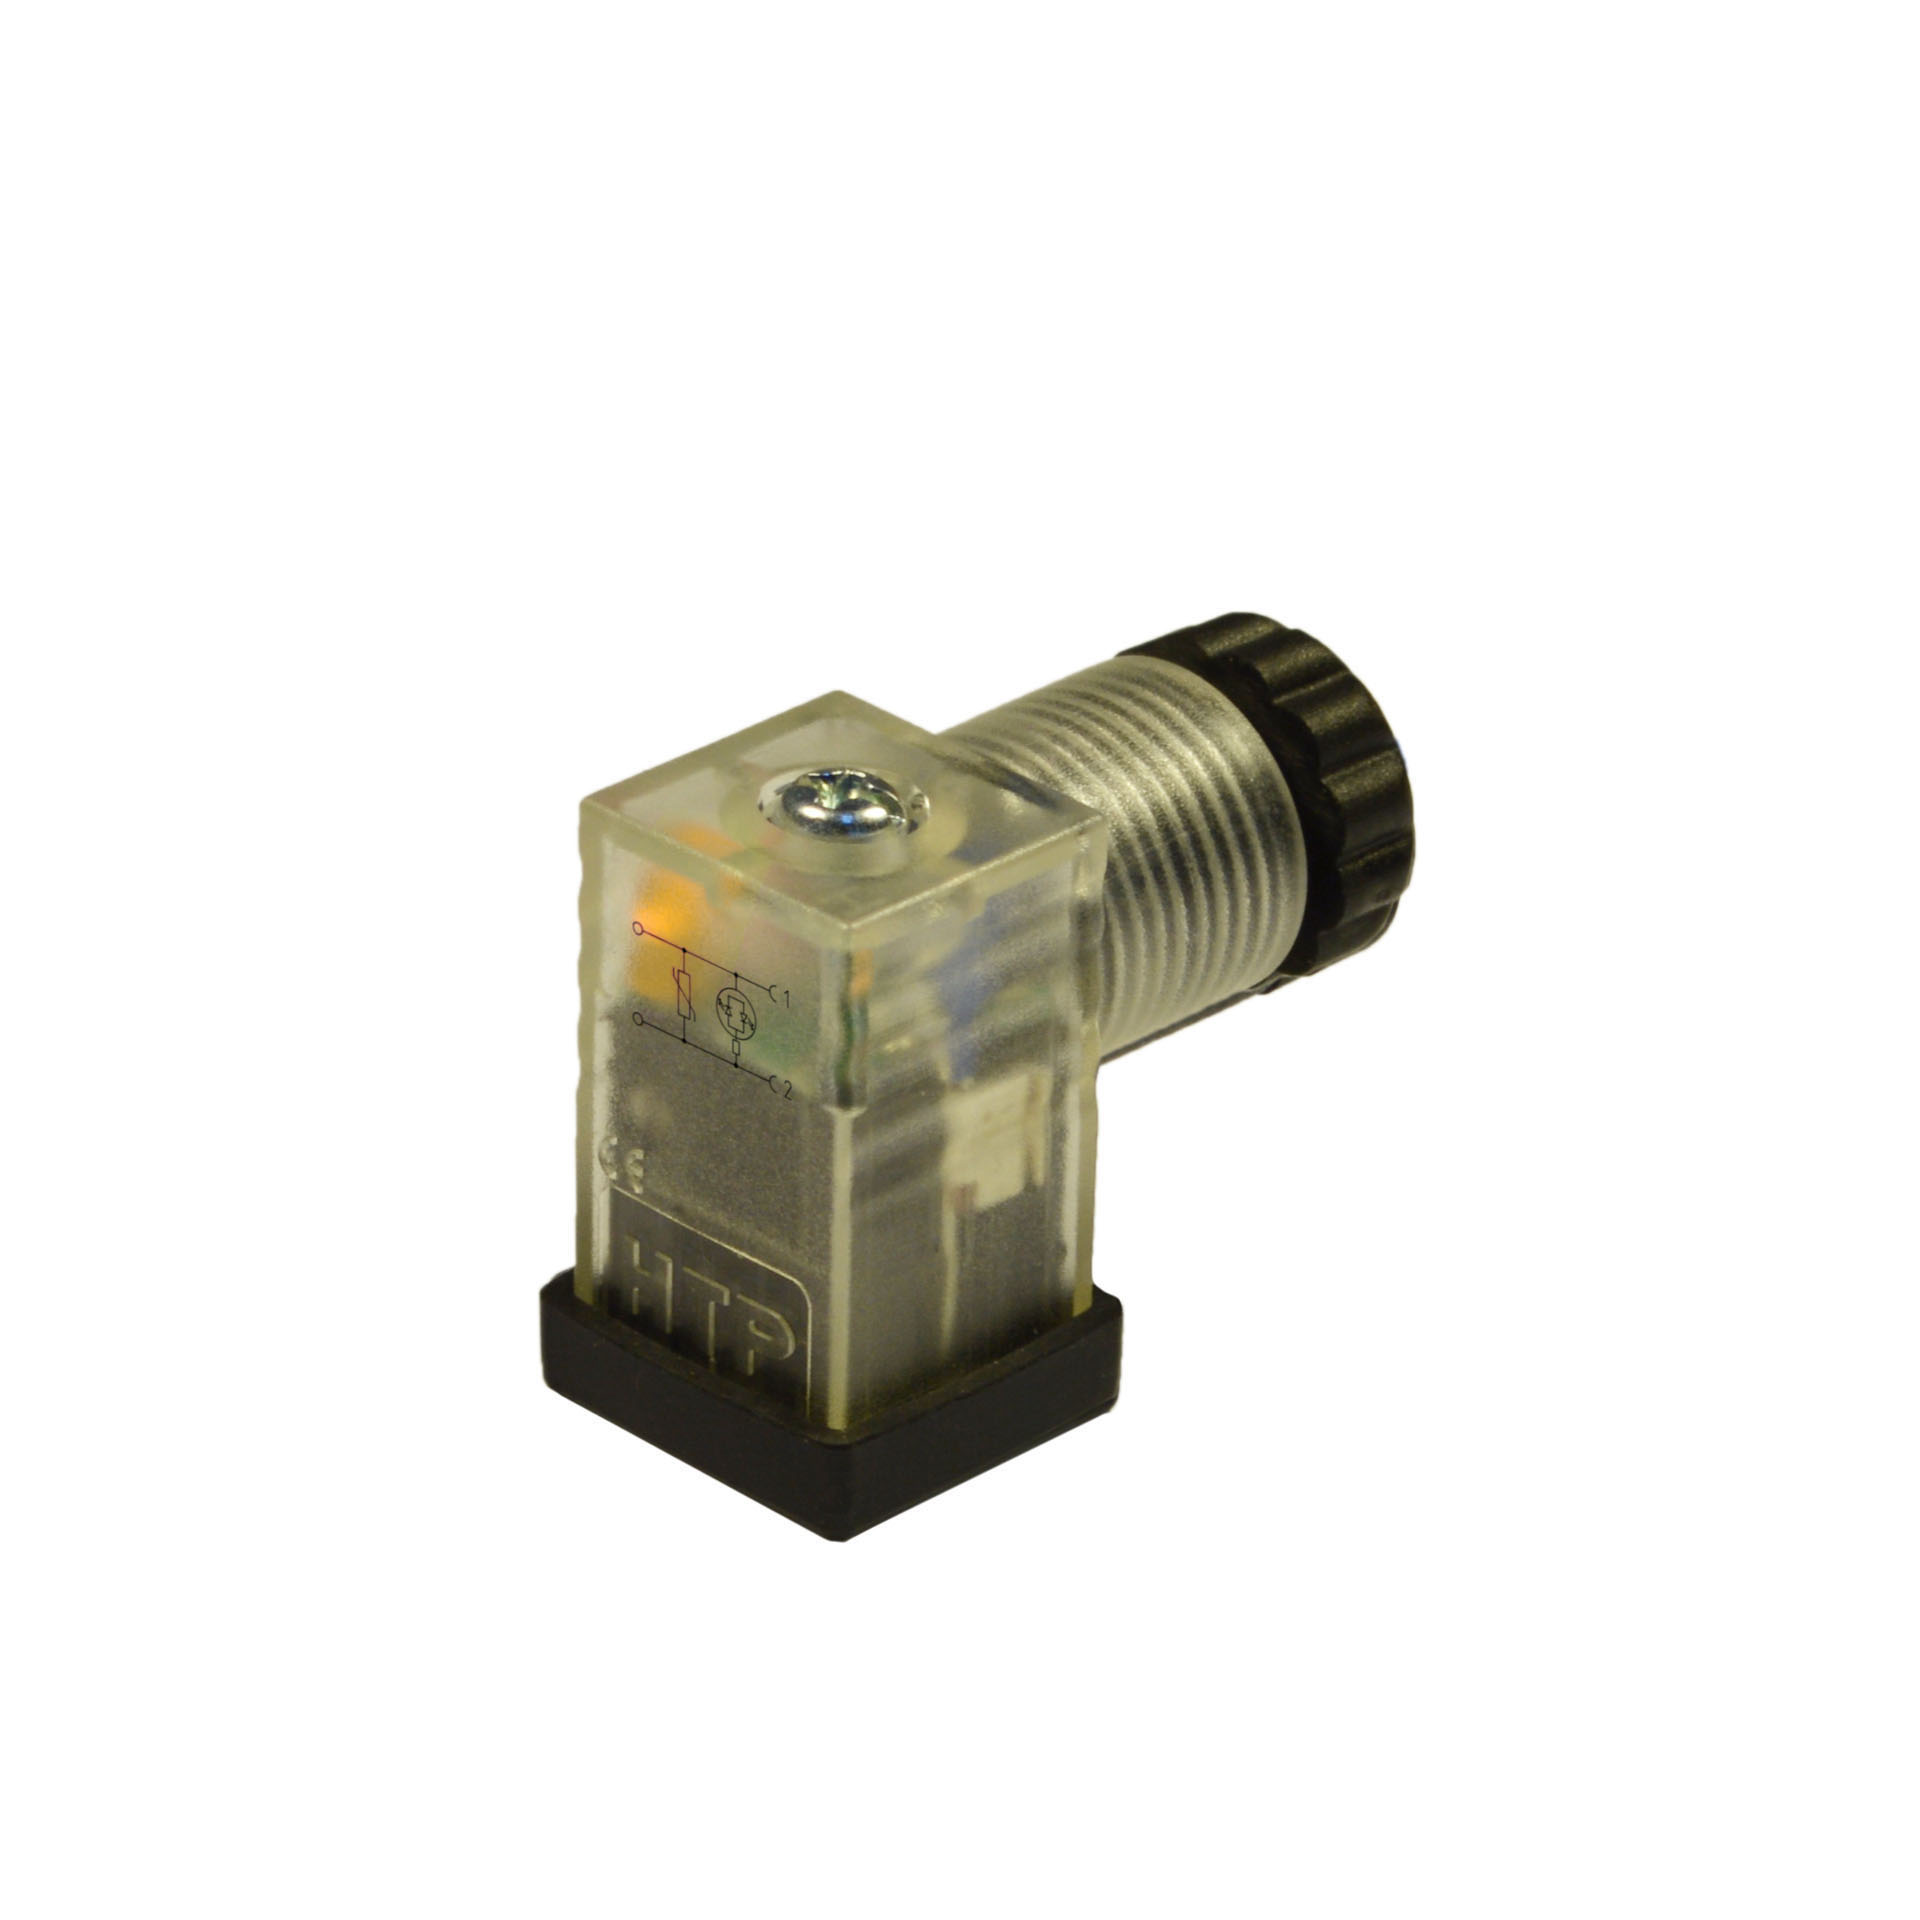 Industrial standard(typeC)field attachable,2p+PE(h.6),yellow LED+vdr,230VAC/DC,PG7